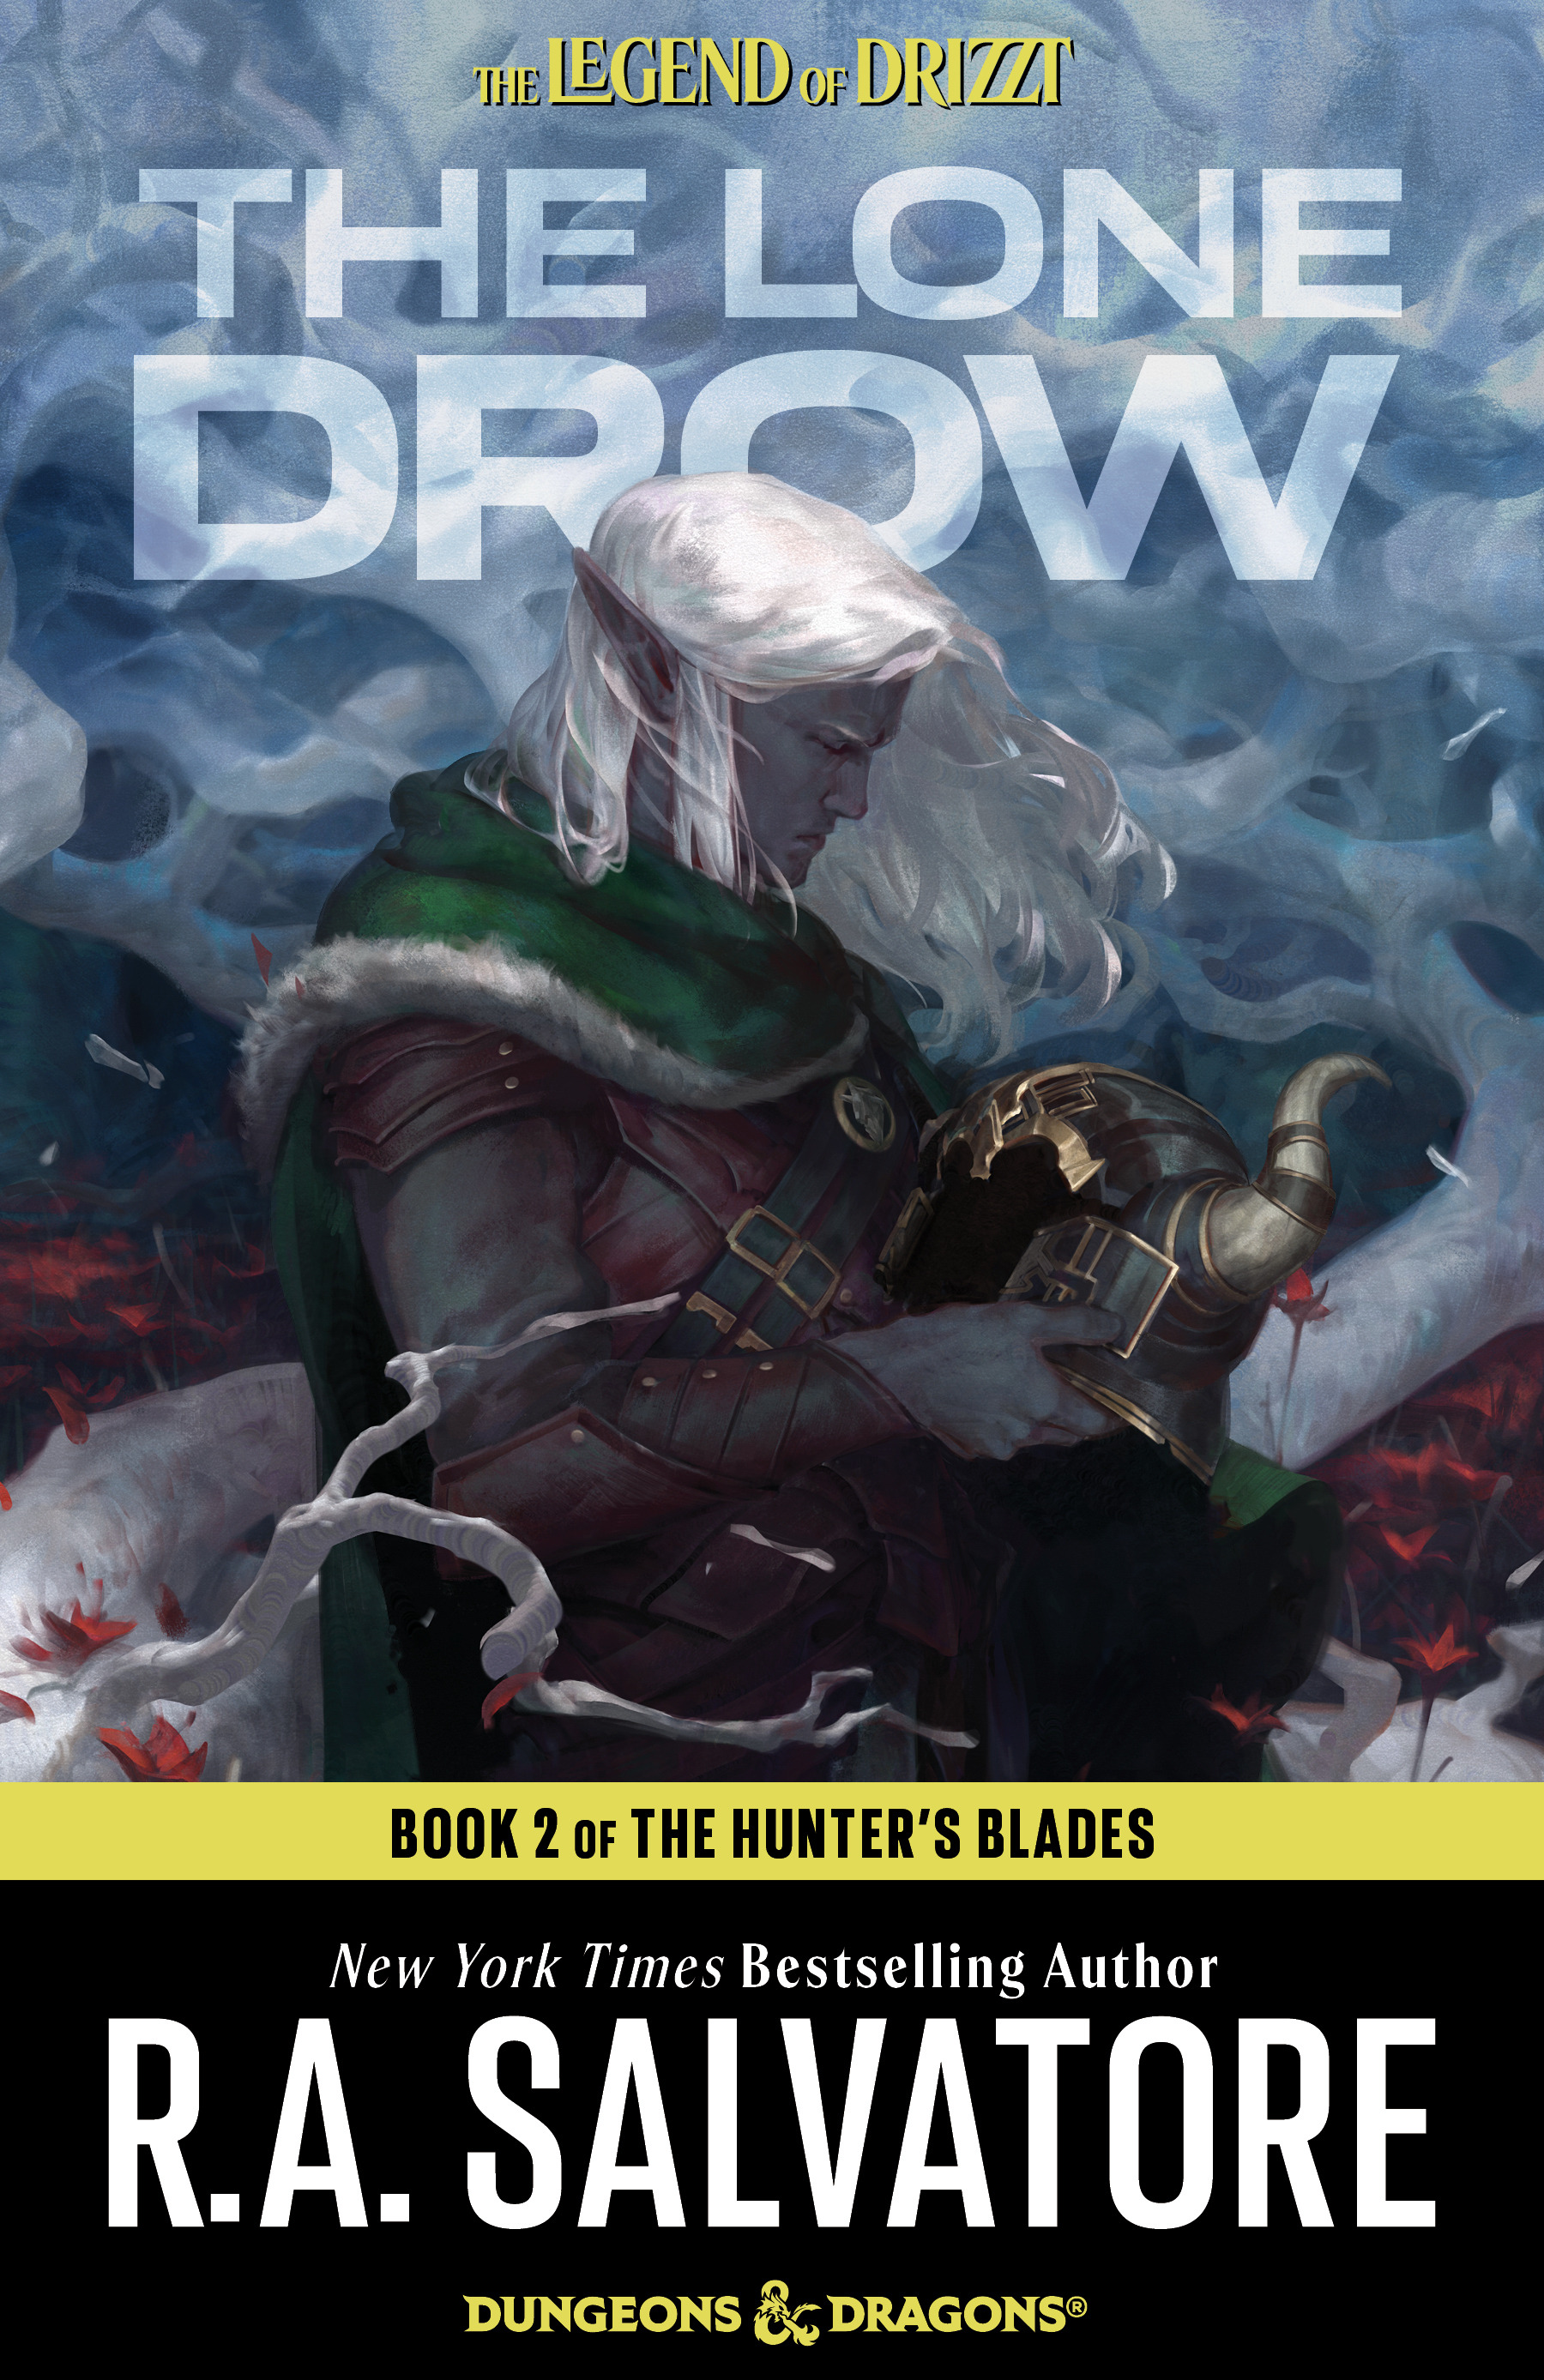 The Lone Drow: Hunter's Blades #2 (Legend of Drizzt #18) R. A. Salvatore Author